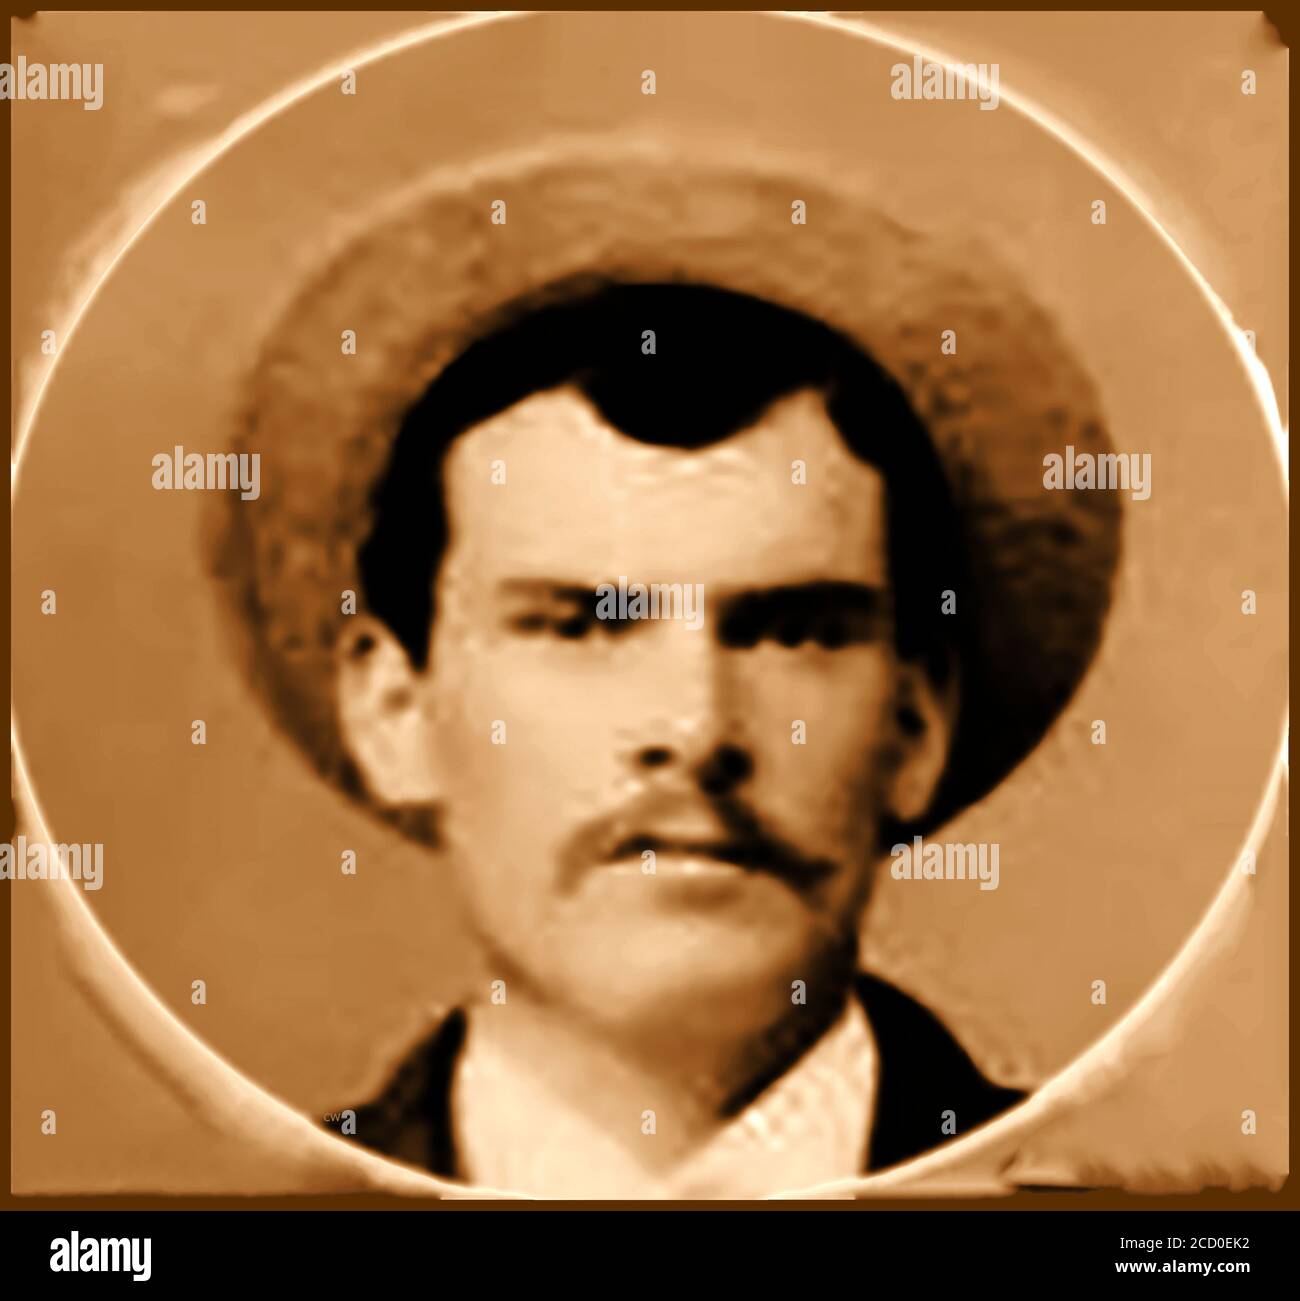 A portrait of  outlaw Harry Alonzo Longabaugh (1867 – 1908 ), ranch hand,  better known as the outlaw and train robber The Sundance Kid . He achieved his nickname after stealing a horse from a ranch in  Sundance, Wyoming.He was part of a gang known as the wild bunch with Robert Leroy Parker (aka Butch Cassidy.) Though called a gunfighter, he could use a gun but  no records of him using guns  as a criminal have been found prior to the shootout in Bolivia. Other aliases used by him were ; Frank Smith H. A. Brown,Harry A. Place (his mother's maiden surname) , Harry Long & Enrique Place Stock Photo